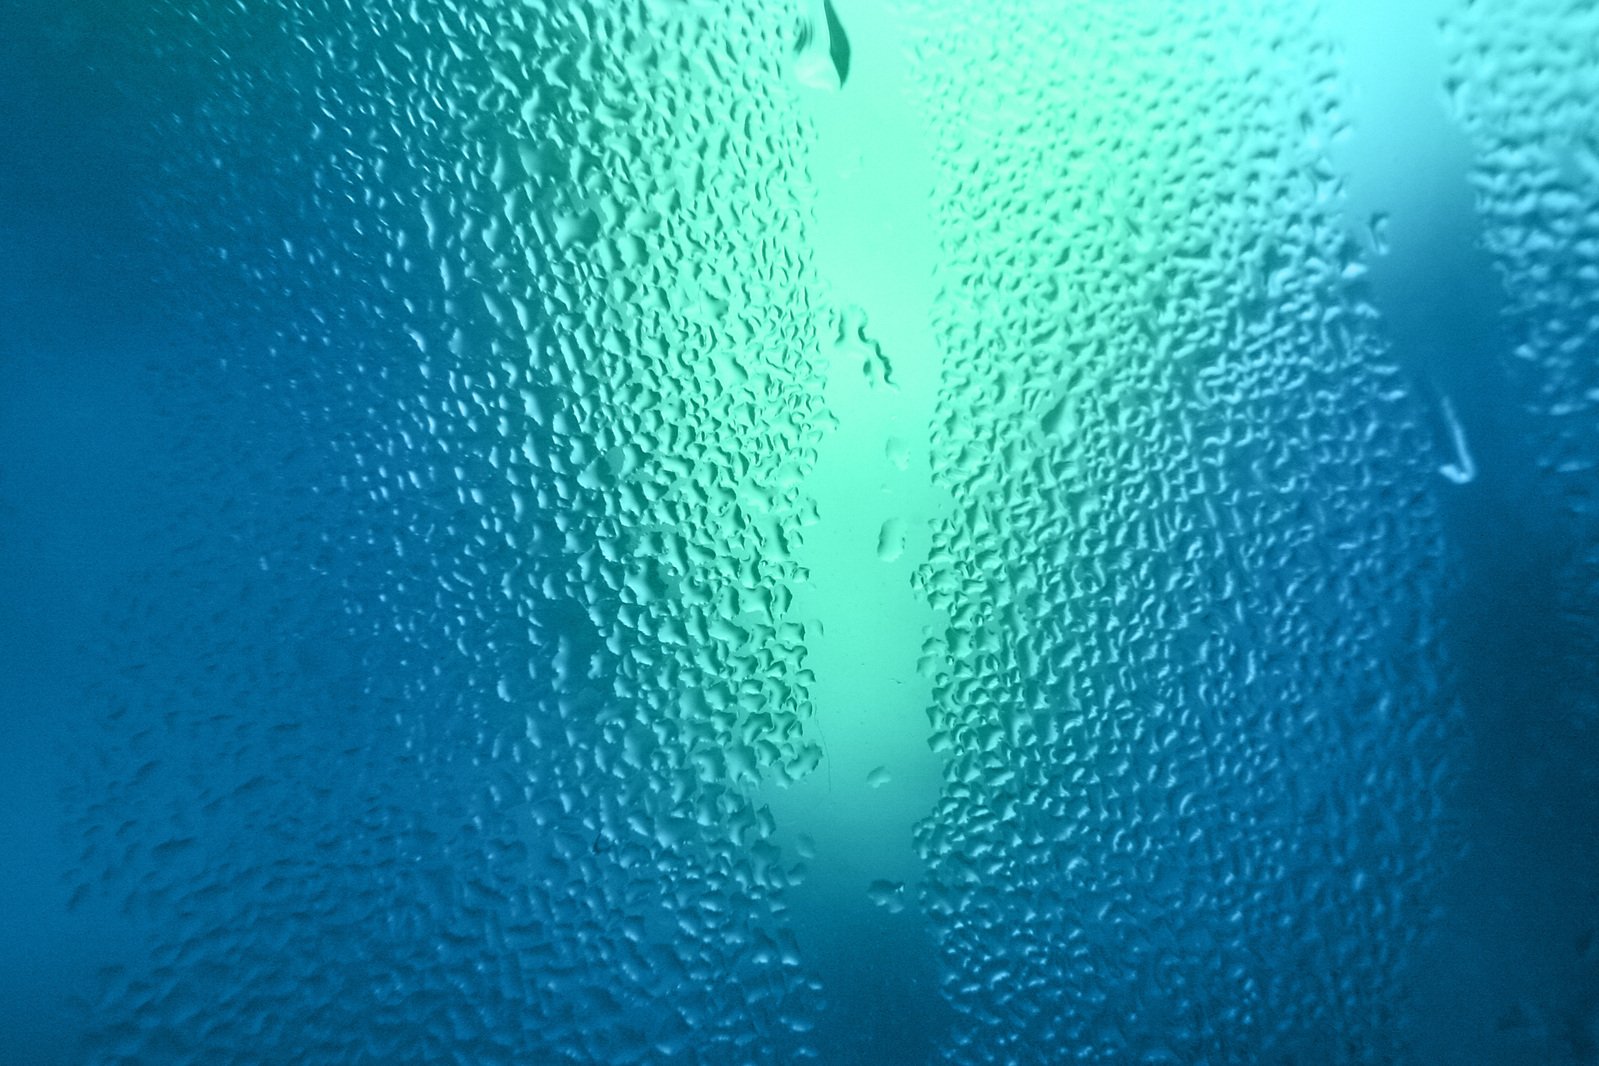 a blue water pattern made up of small drops